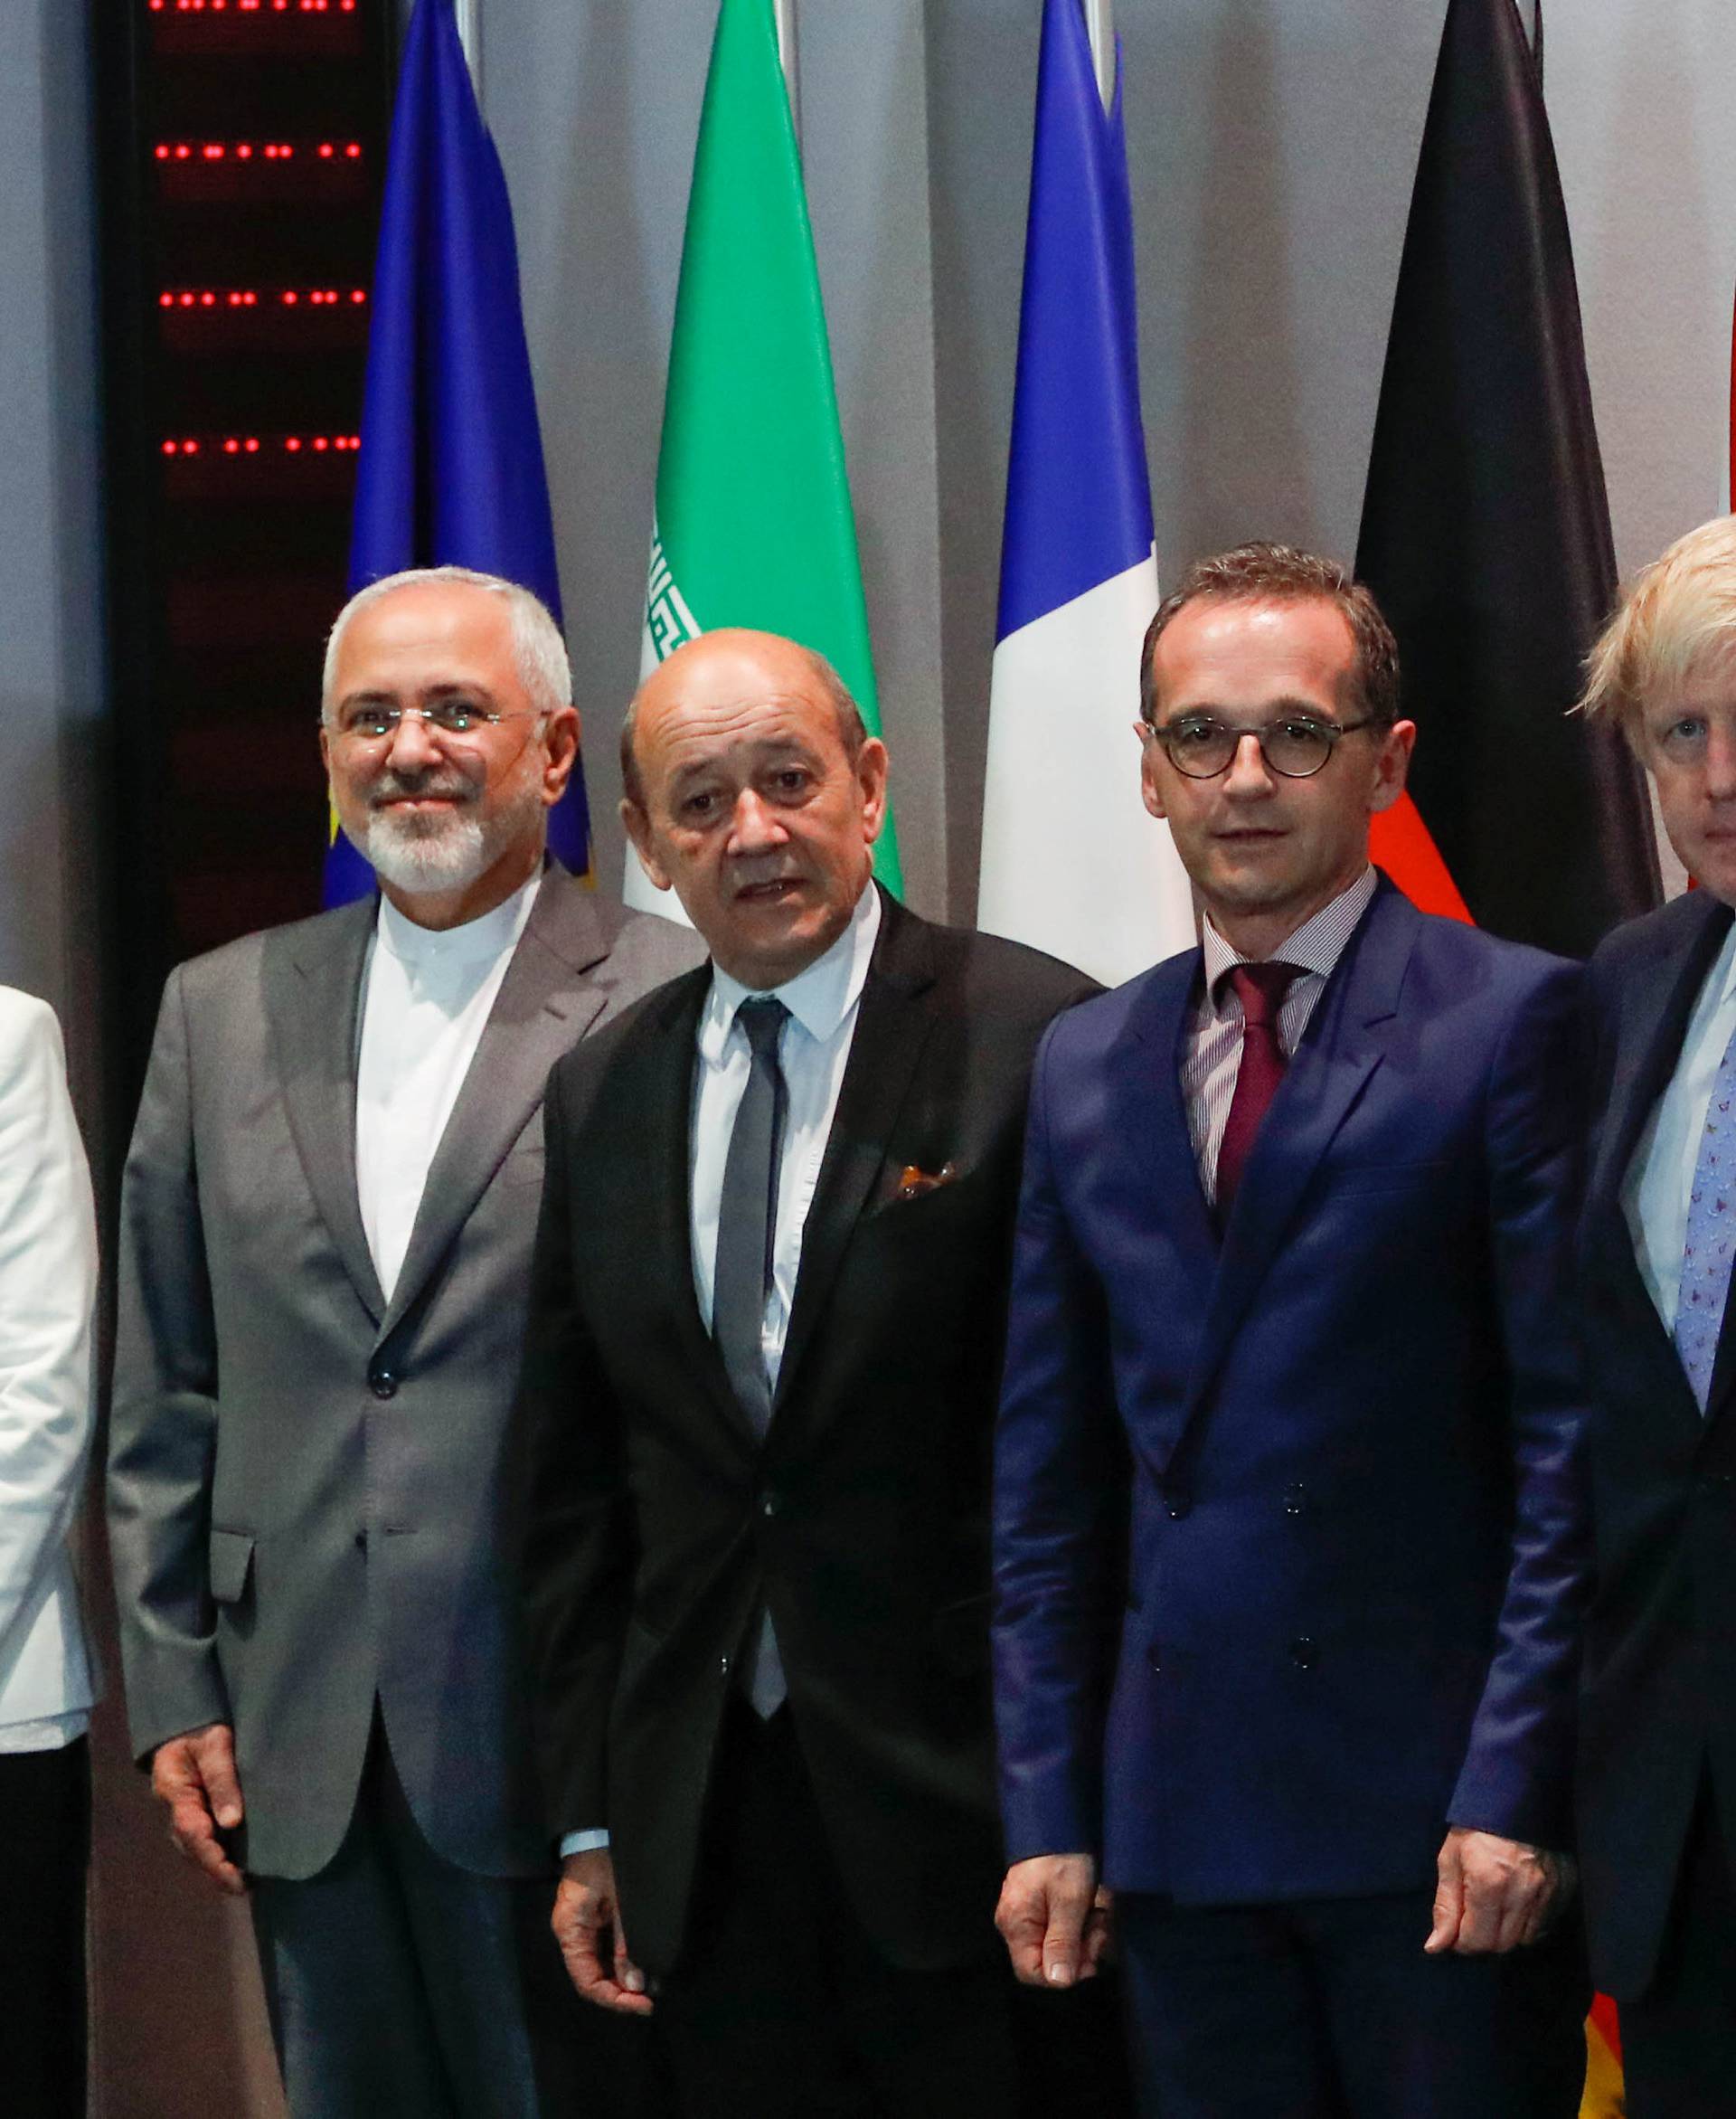 Britain's Foreign Secretary Johnson, German Foreign Minister Maas, French Foreign Minister Le Drian and EU High Representative for Foreign Affairs Mogherini take part in meeting with Iran's Foreign Minister Mohammad Javad Zarif in Brussels